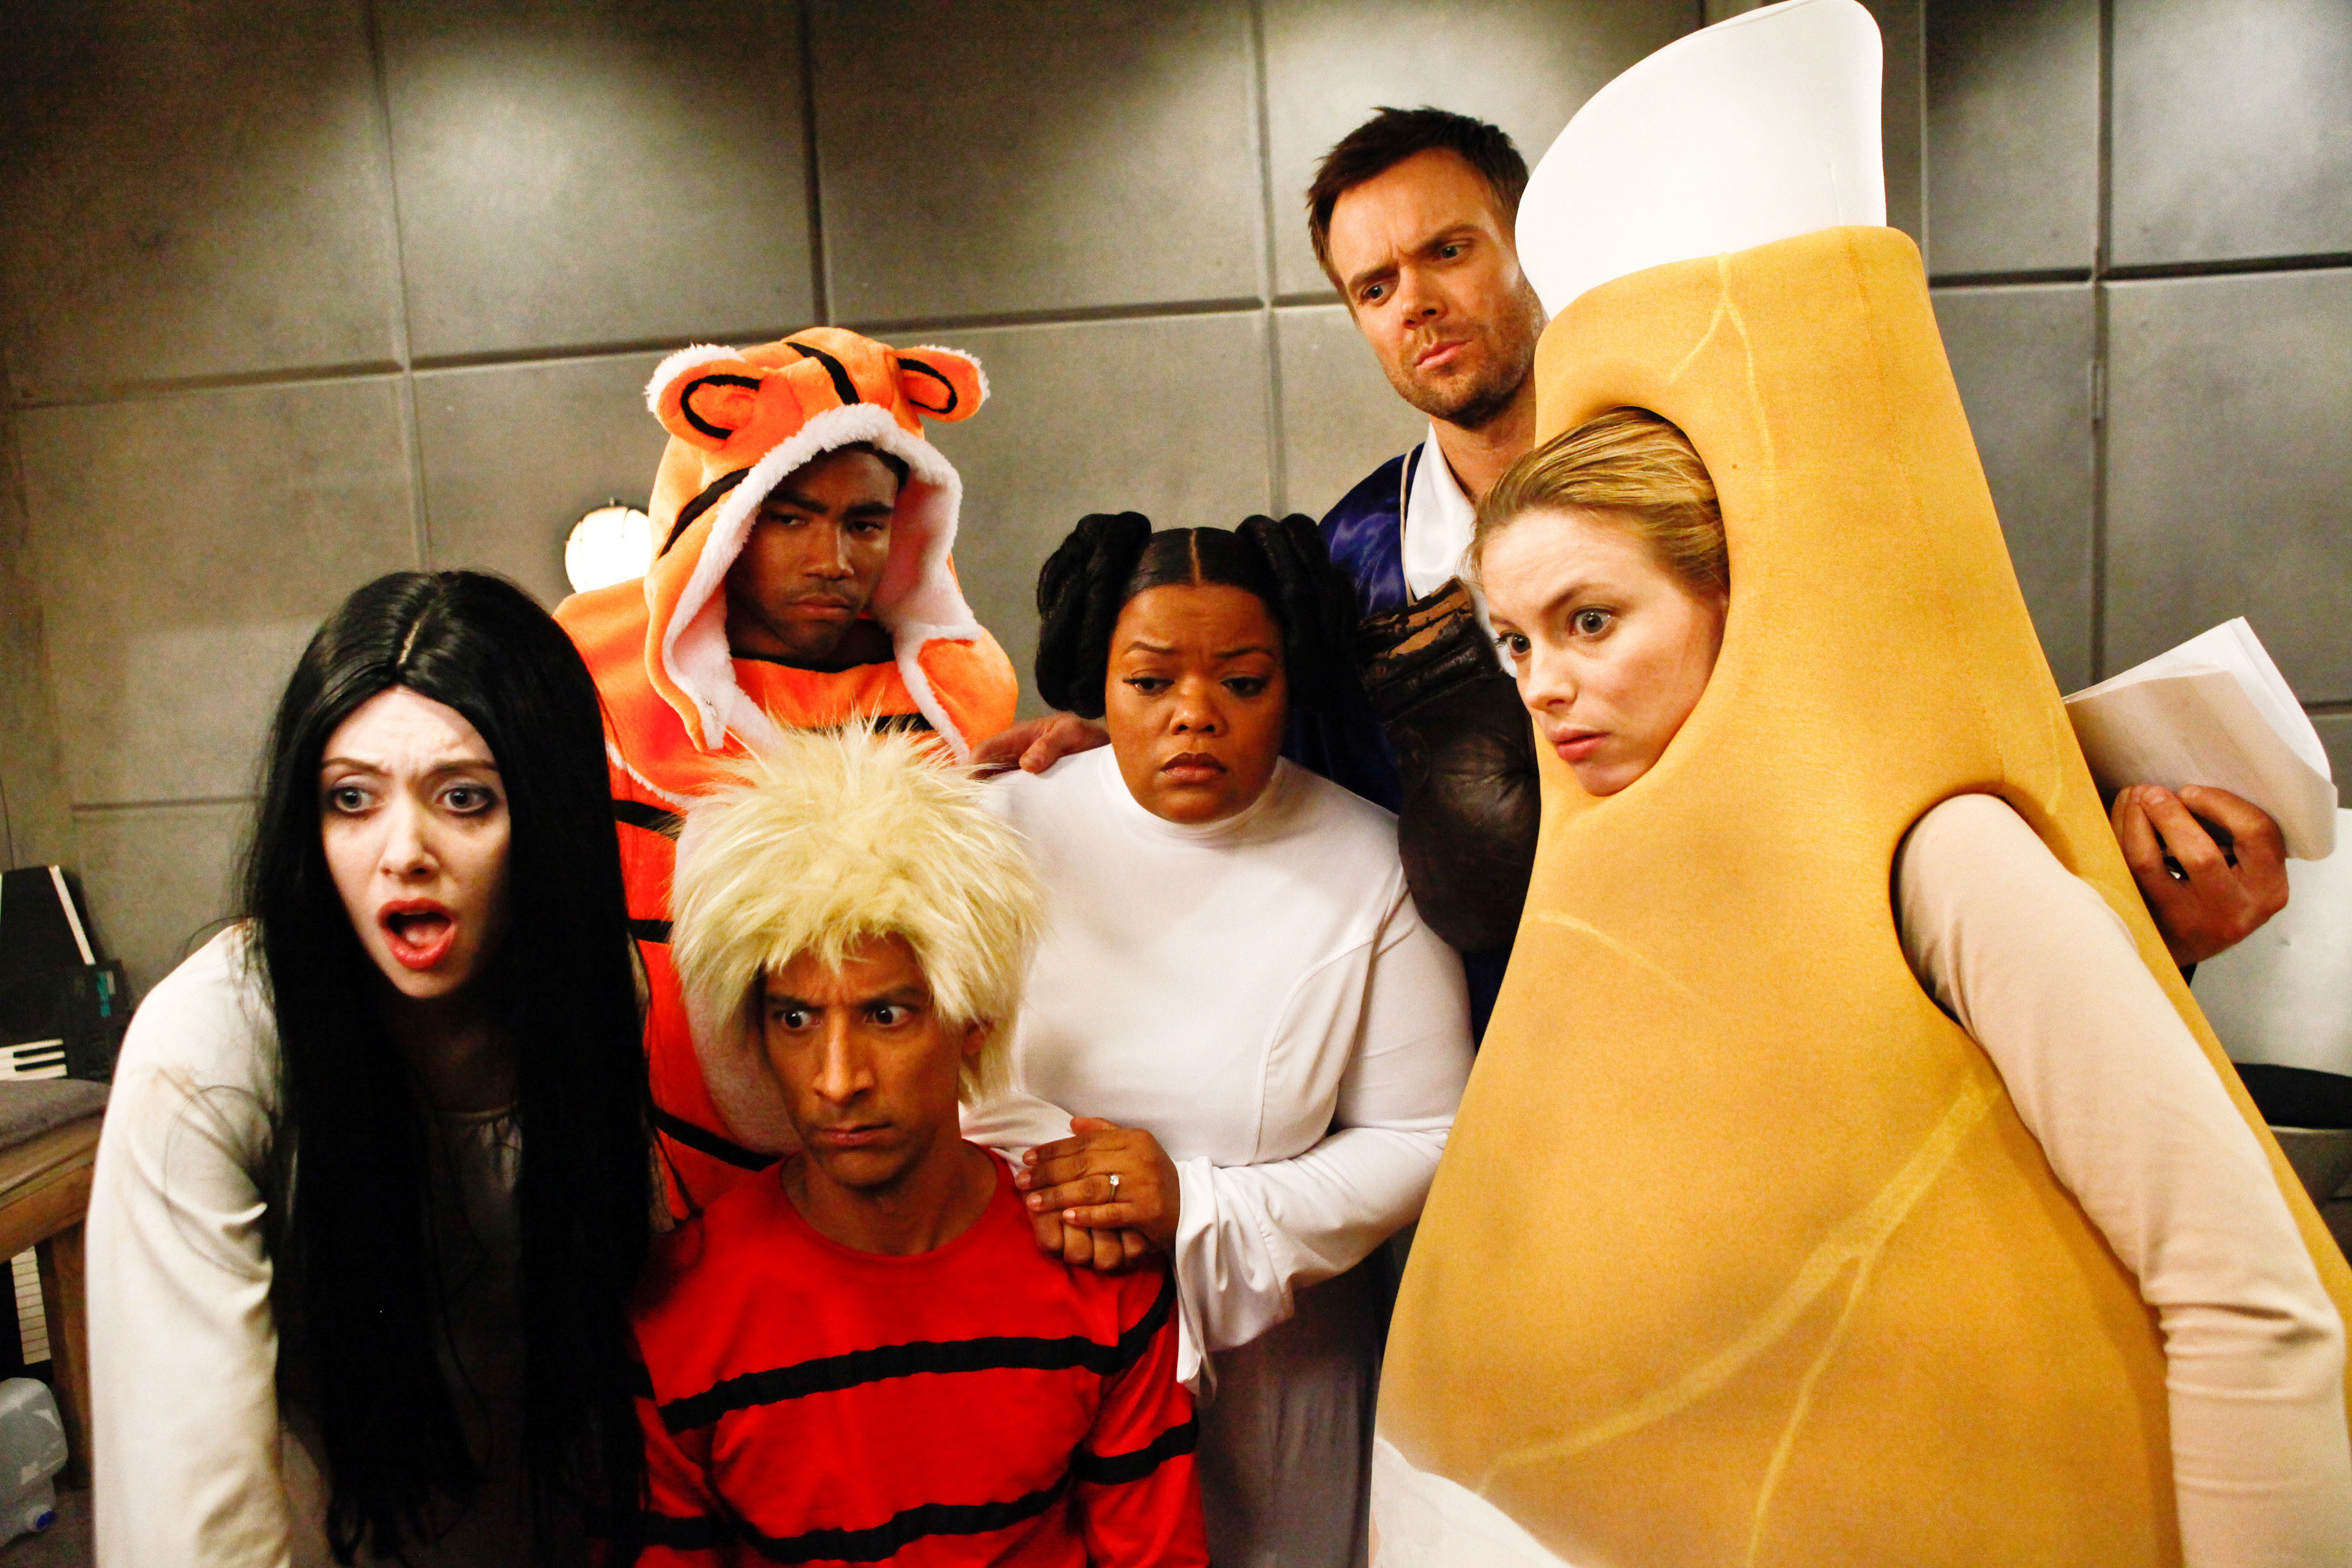 The cast of Community on set in Halloween costumes